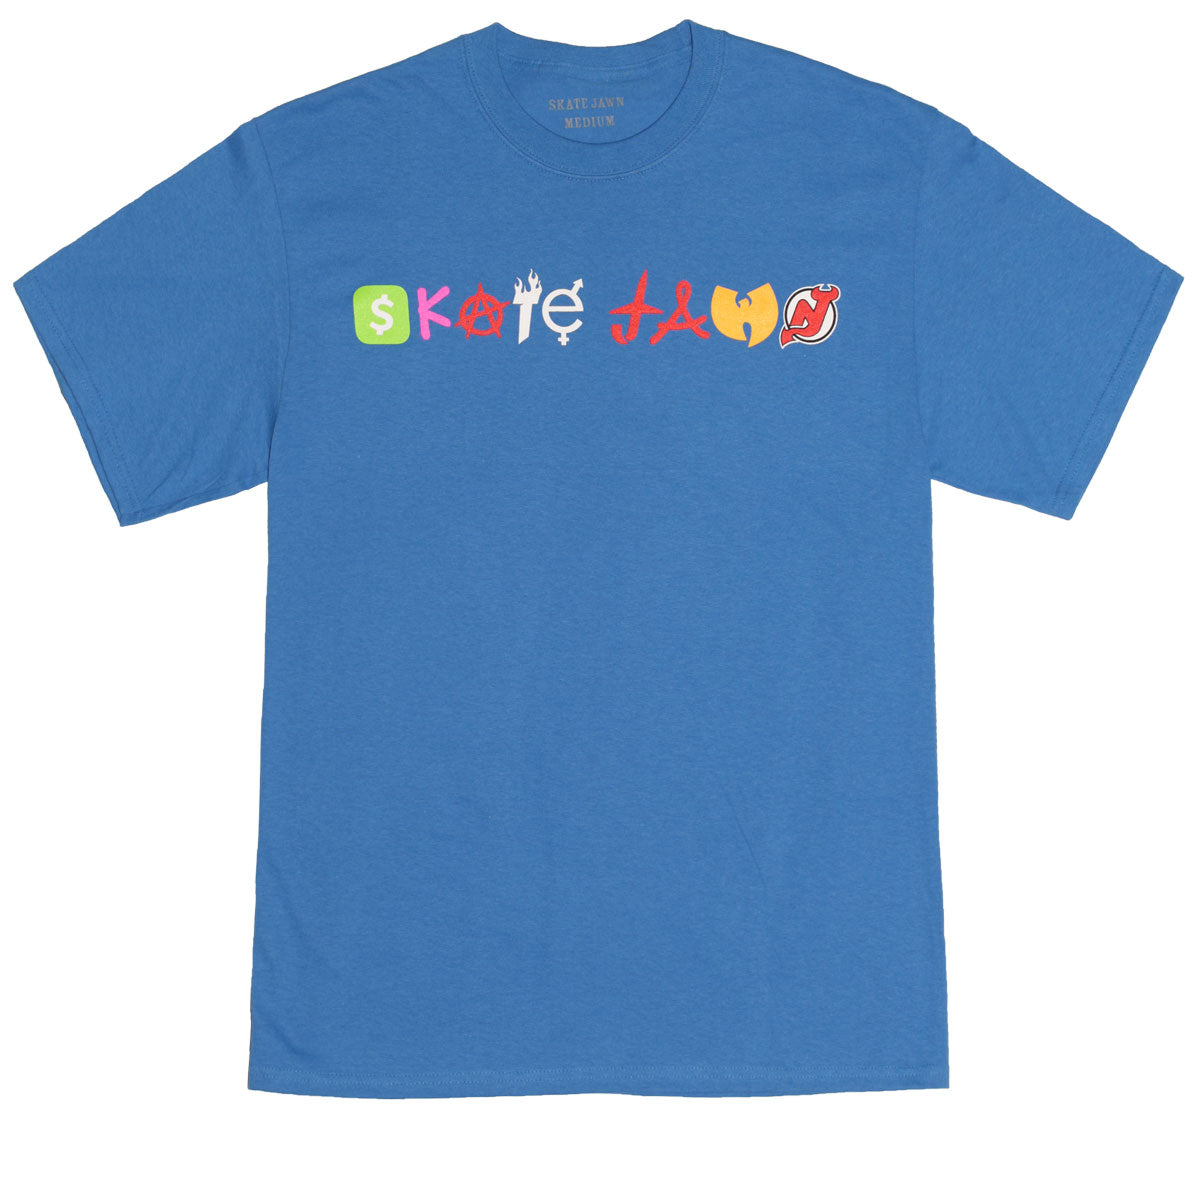 Skate Jawn Coexist T-Shirt - Blue image 1